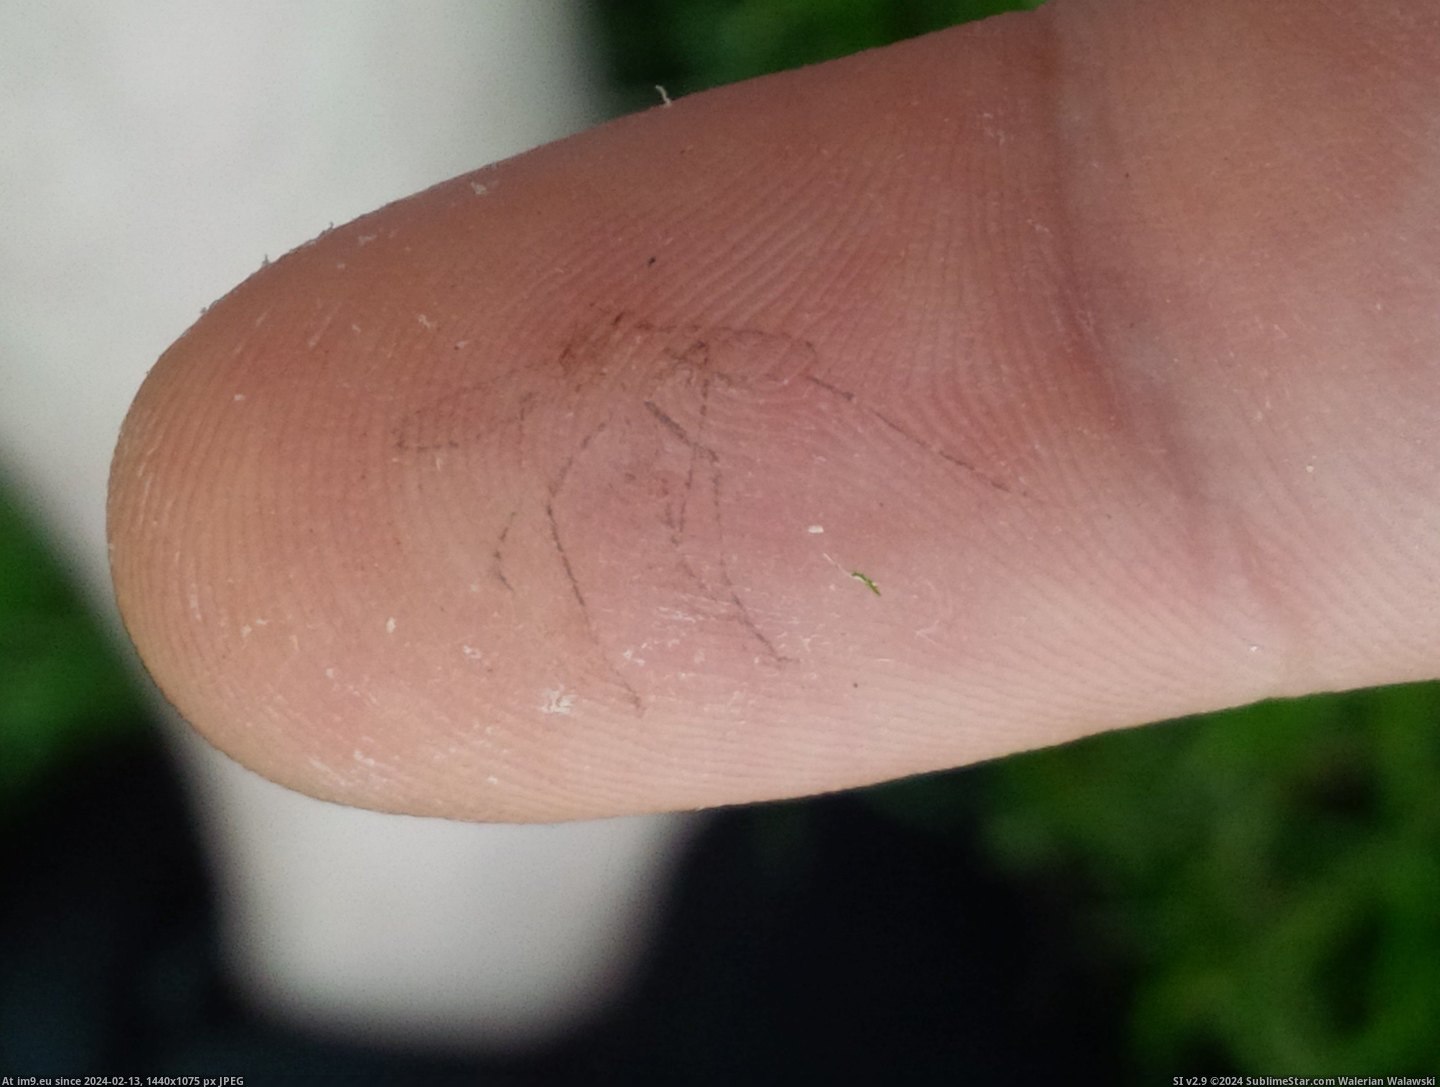 #Finger #Air #Mosquito #Moment #Imprint [Mildlyinteresting] Slapped a mosquito out of the air and got an imprint of its last moment on my finger Pic. (Image of album My r/MILDLYINTERESTING favs))